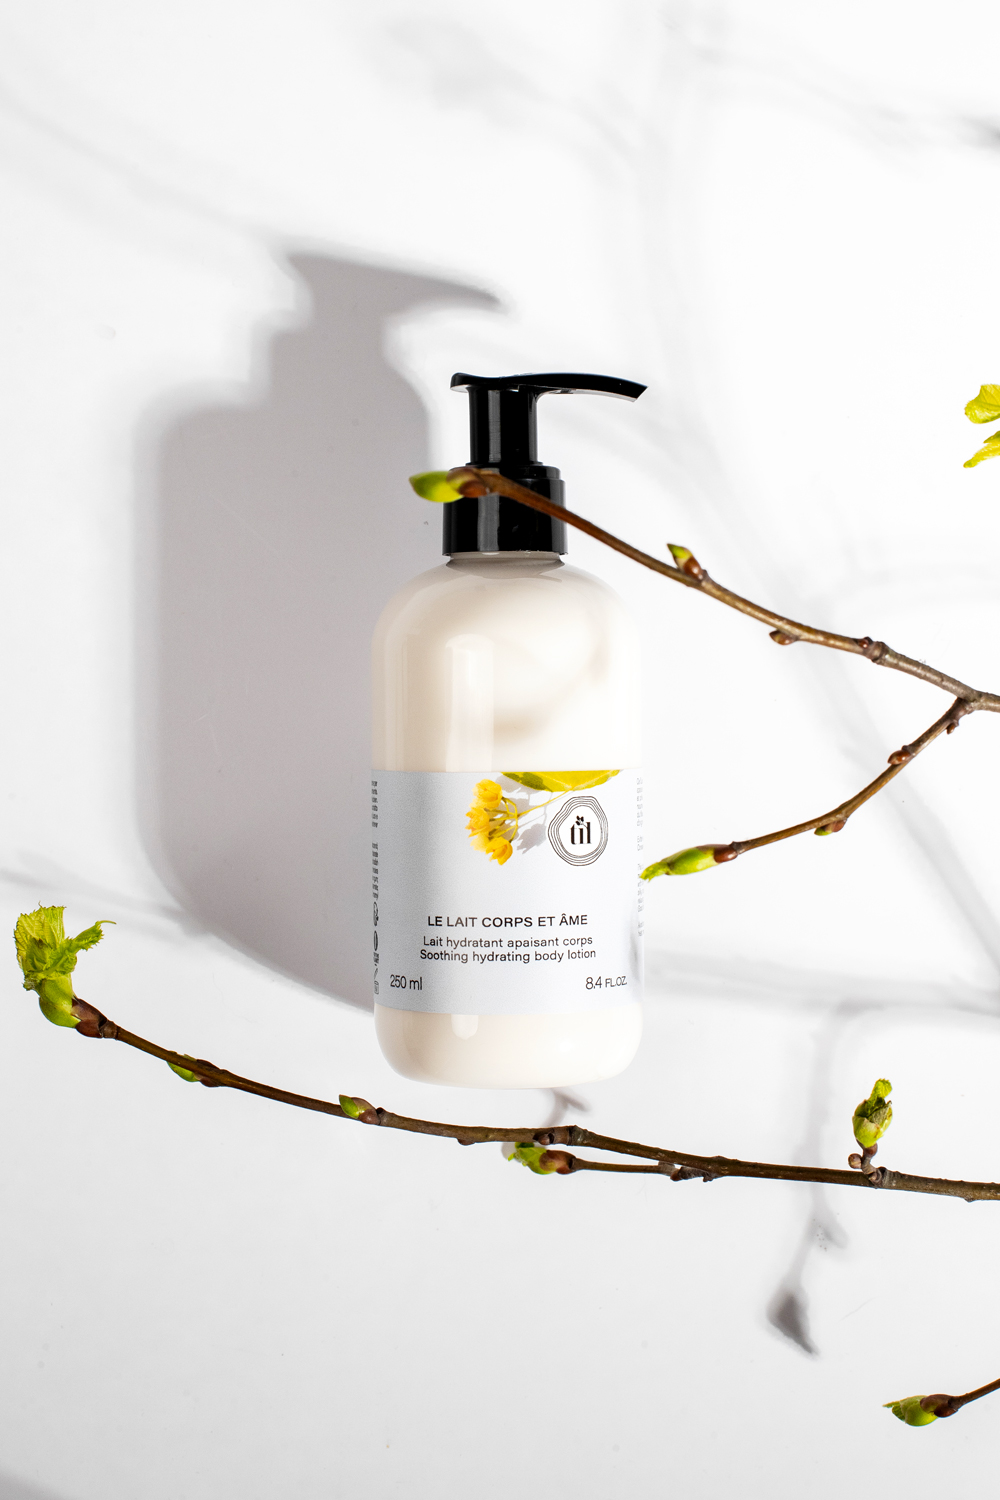 A highly penetrating moisturising body milk with a perfectly fluid texture. Leaves the skin soft and silky, and delicately scented with the sweet smell of linden blossom.